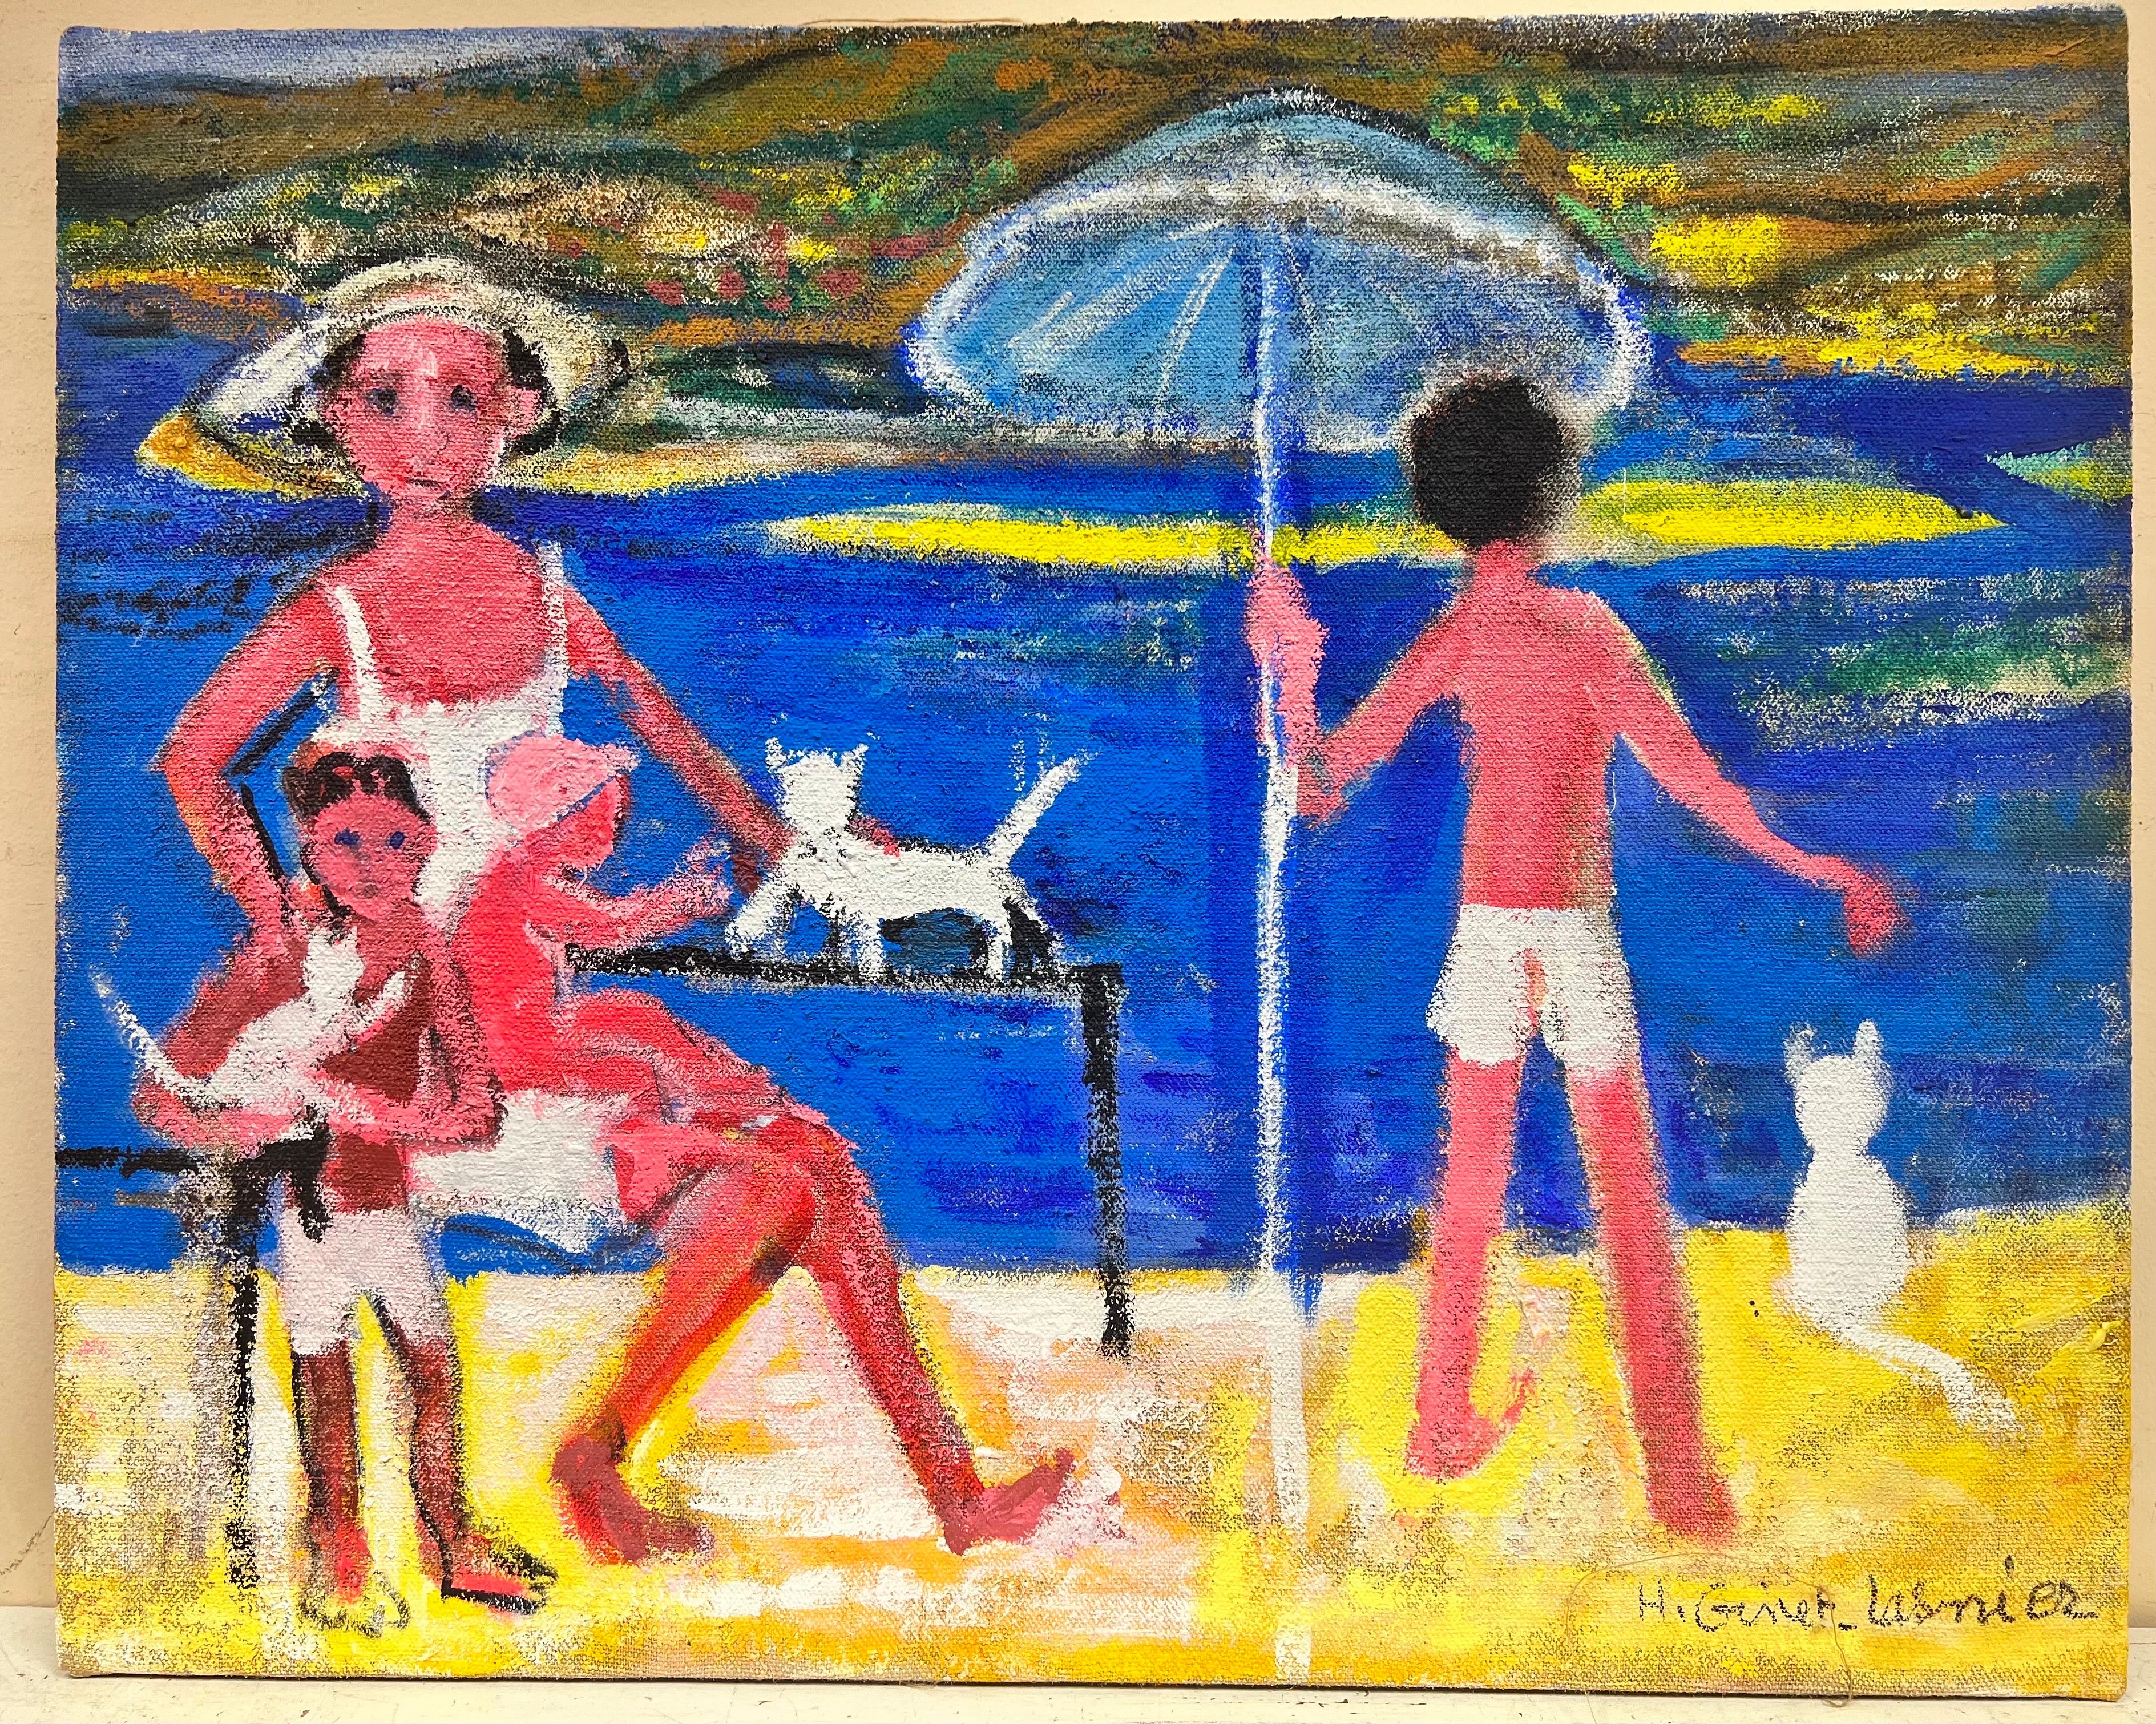 On the Beach
Huguette Ginet-Lasnier (French 1927-2020), signed
inscribed verso
oil painting on textured canvas
26 x 32 inches.
All the paintings we have for sale by this artist have come from the artists estate in France.
The painting is in very